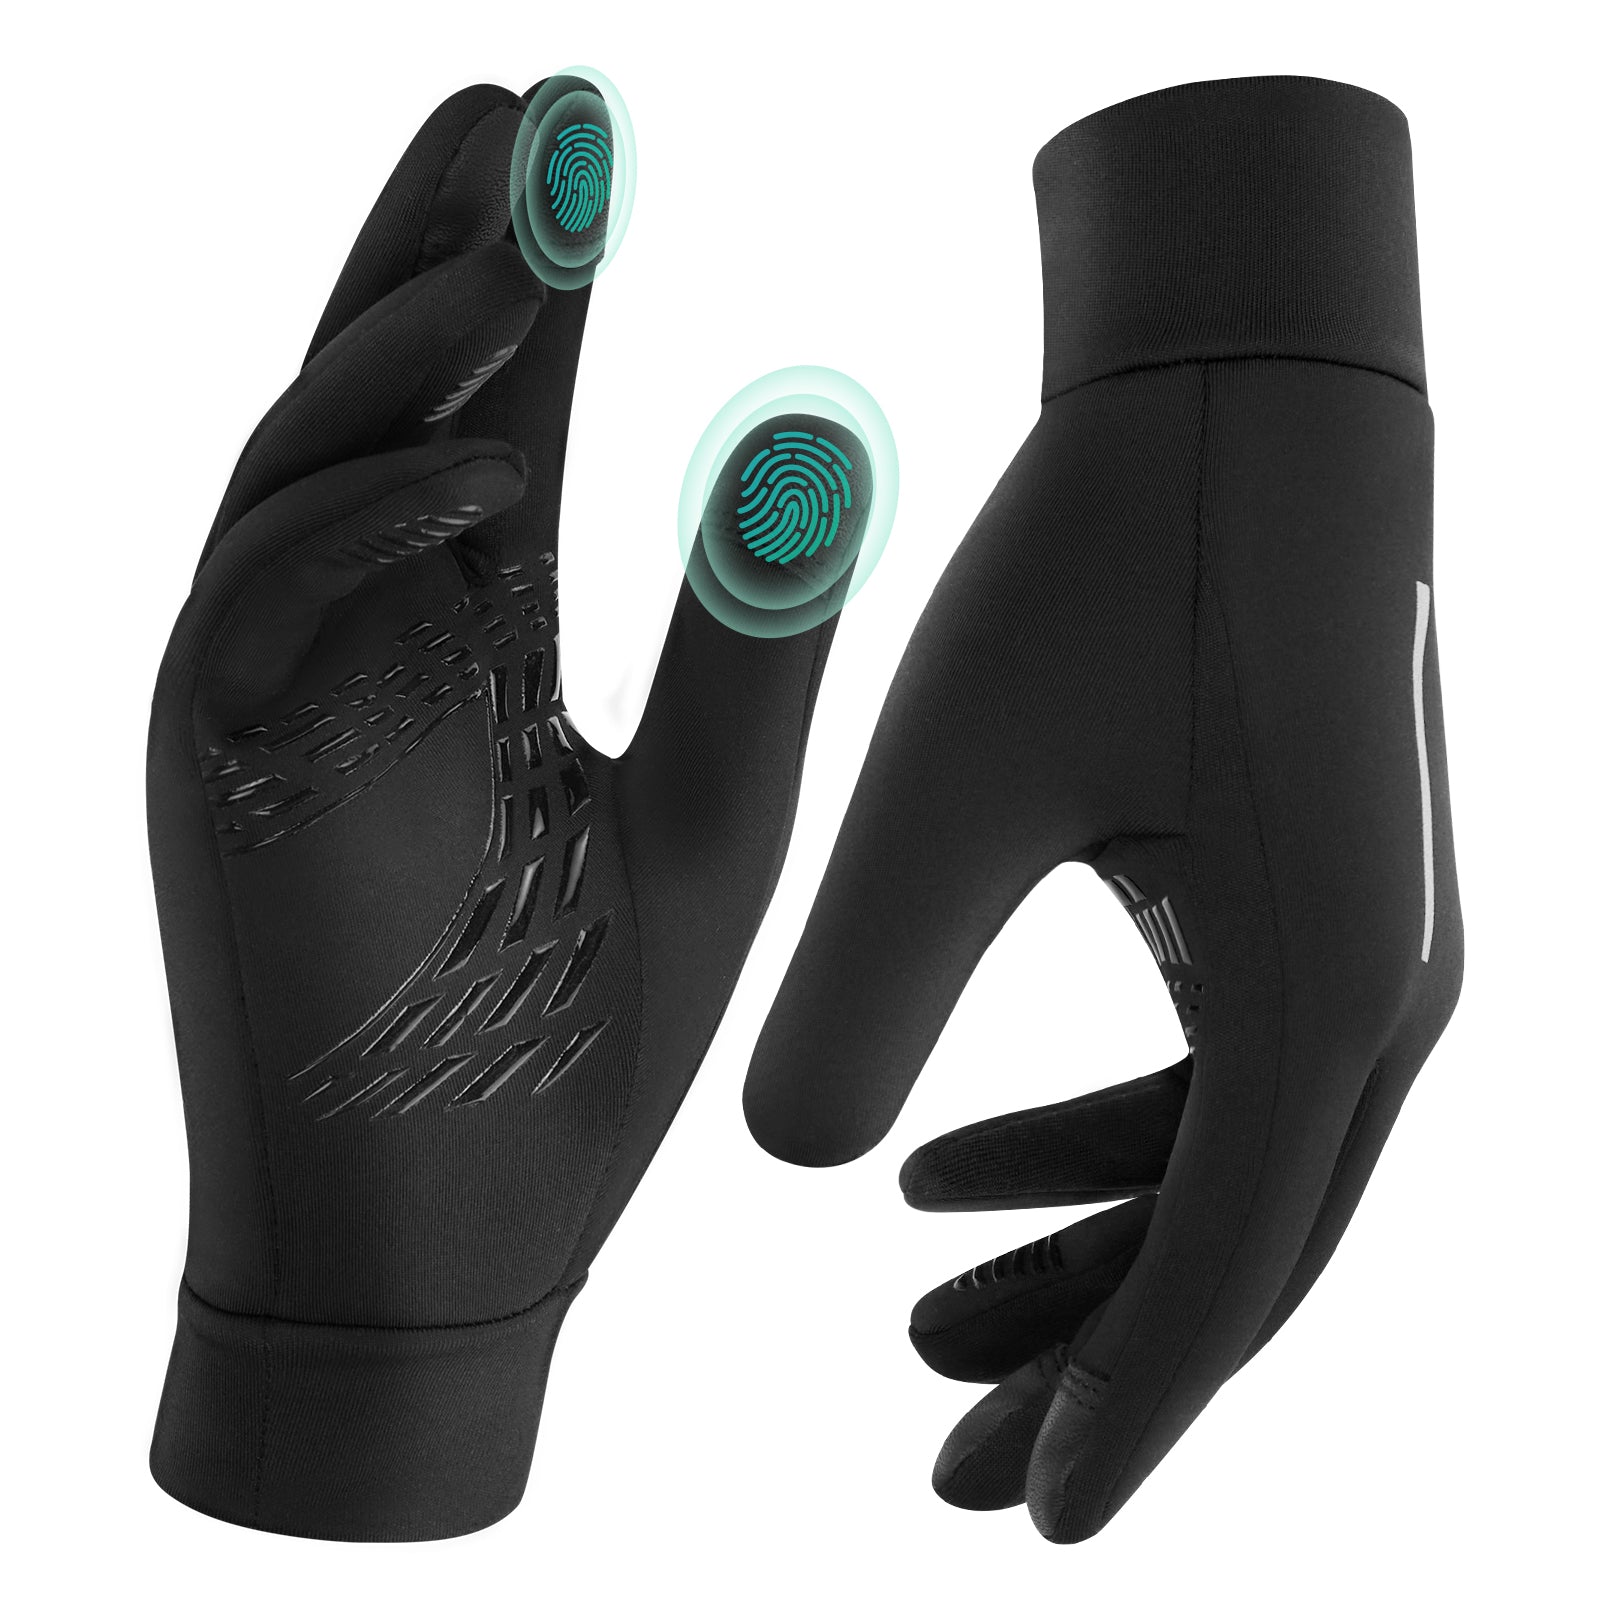 Touchscreen Warm Winter Gloves: Touch Screen Gloves Cold Weather Gloves with Anti-slip Palm and Thickened Fleece Lining